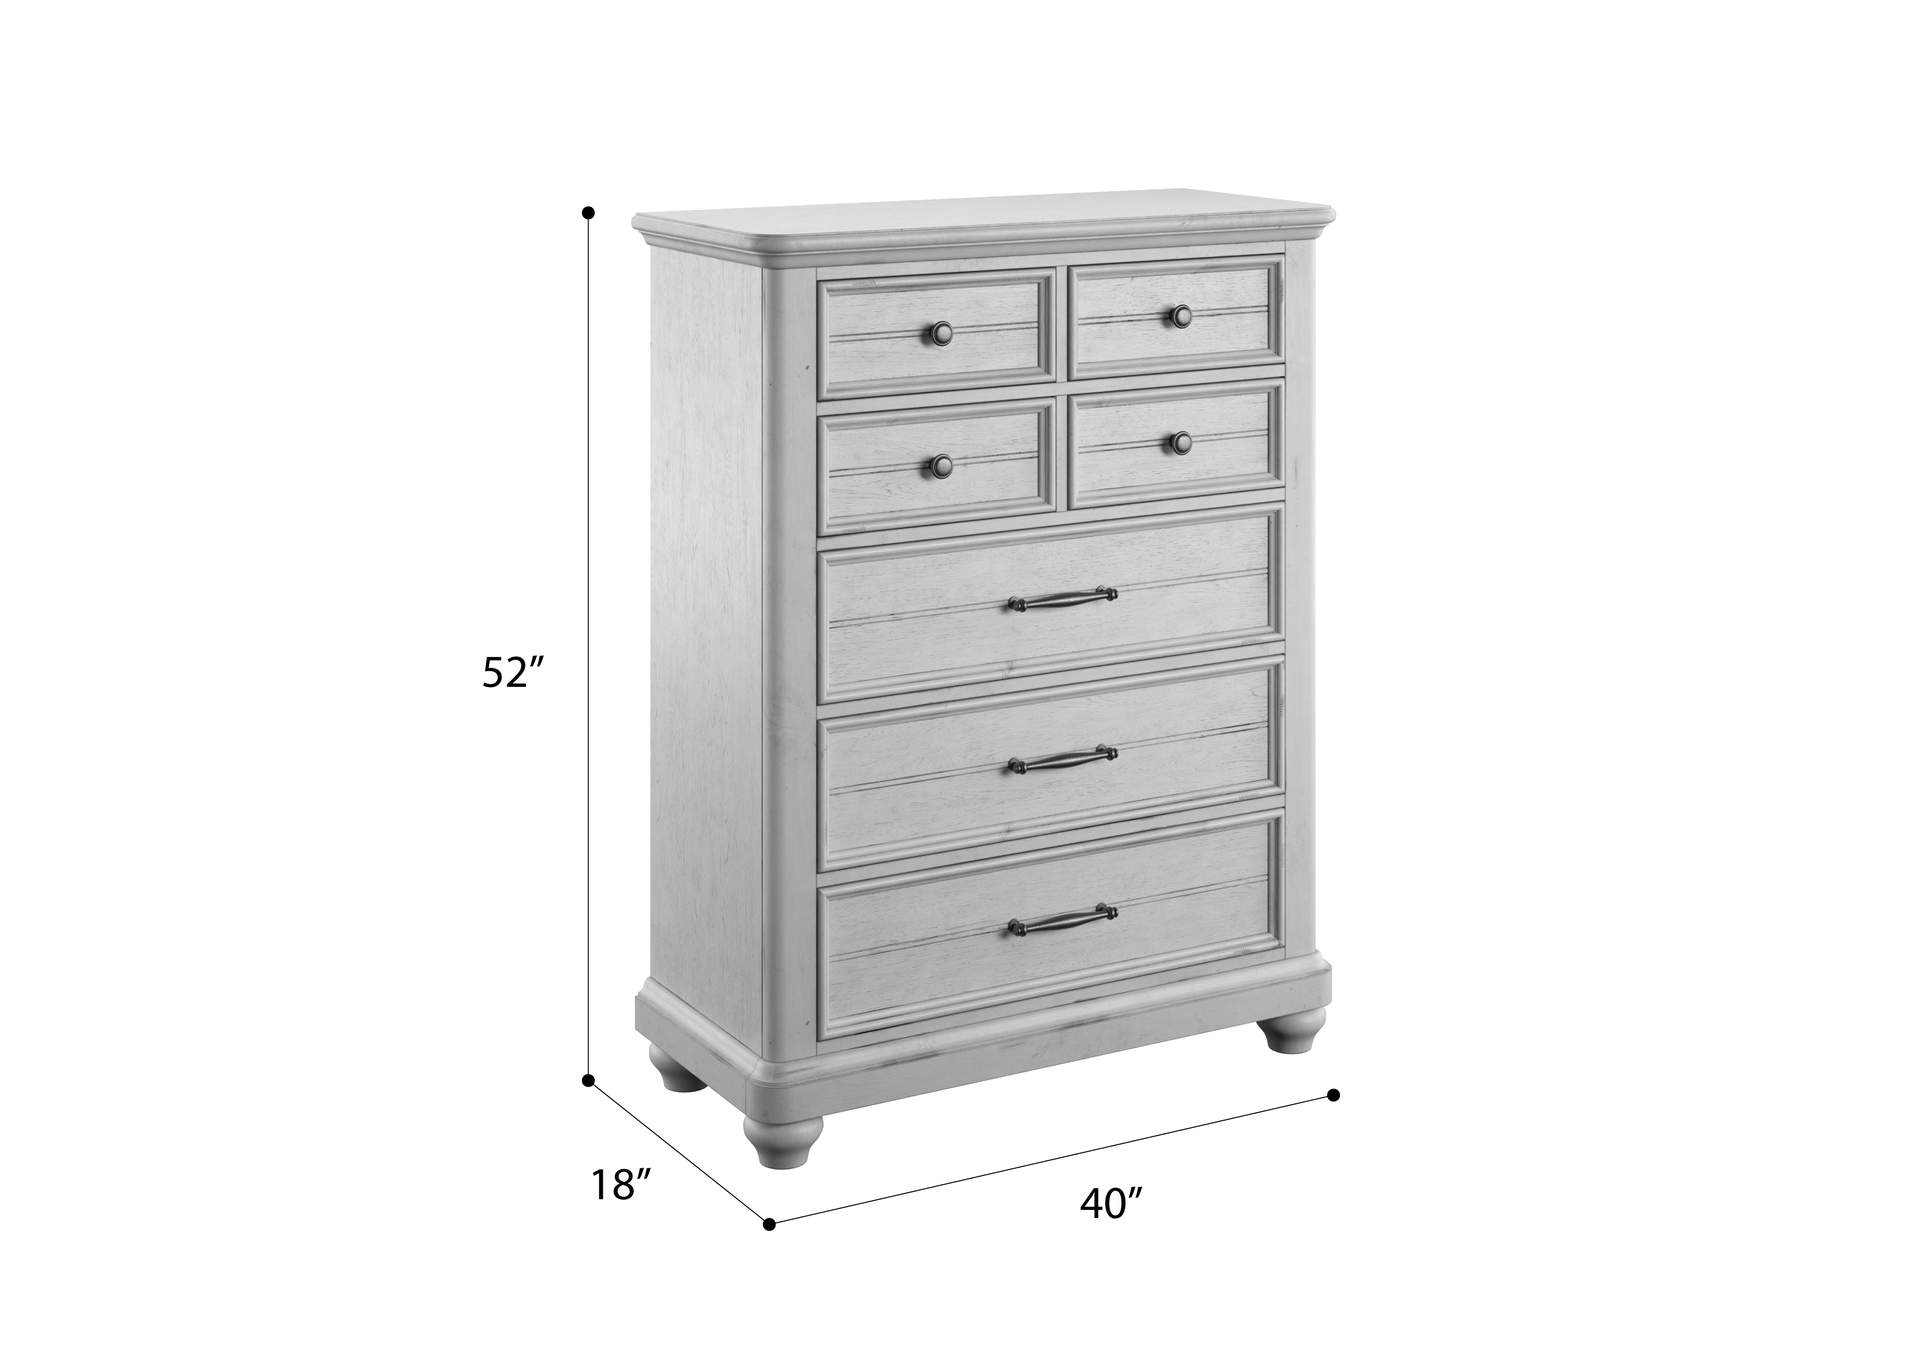 New Haven Drawer Chest,Emerald Home Furnishings